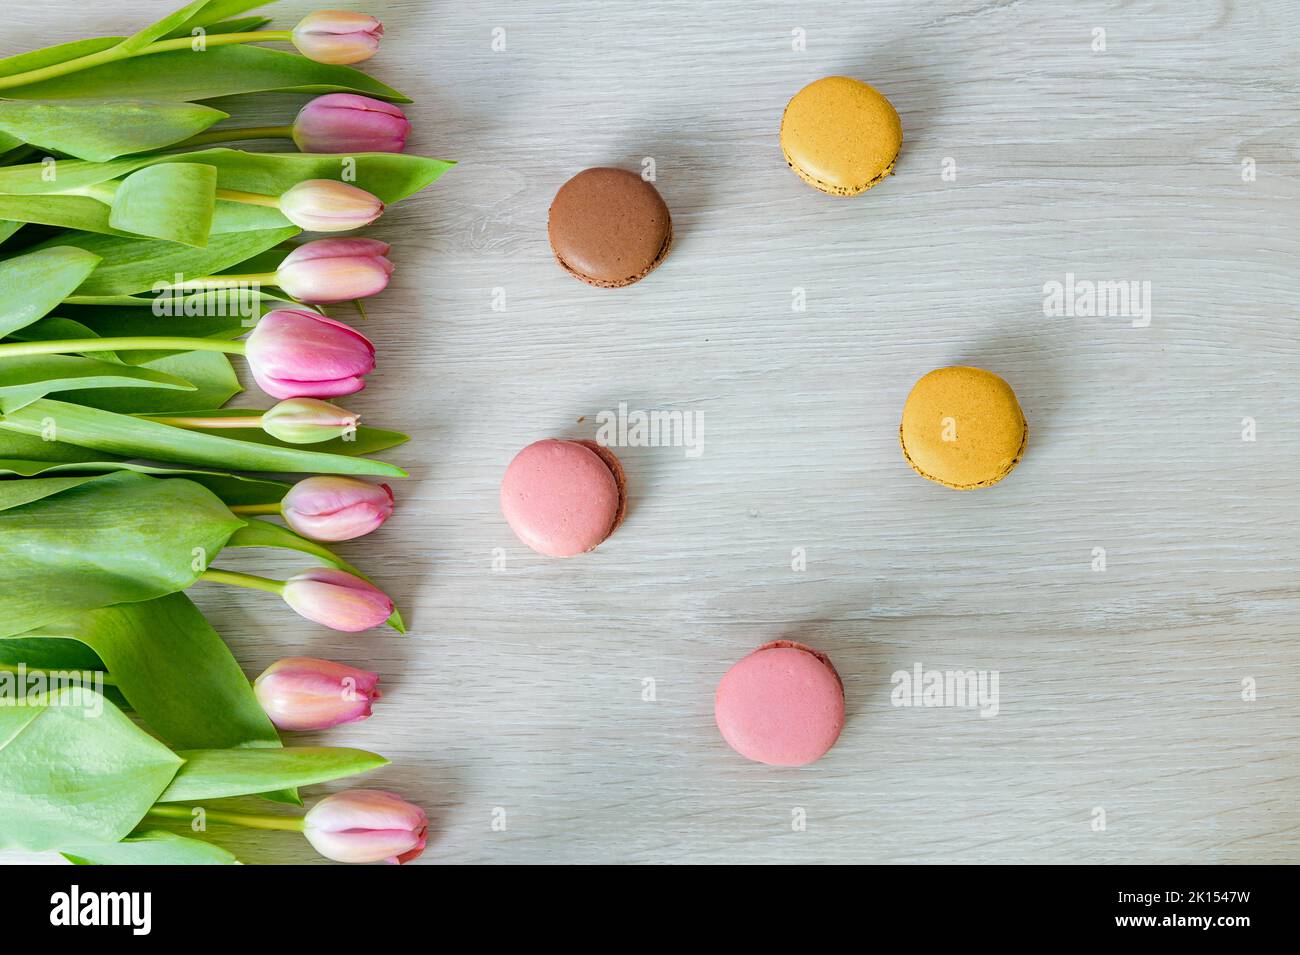 Tulips with pink flowers in front of white wood. Colorful delicious macarons in front of white wood. Top view photographed from above. Stock Photo